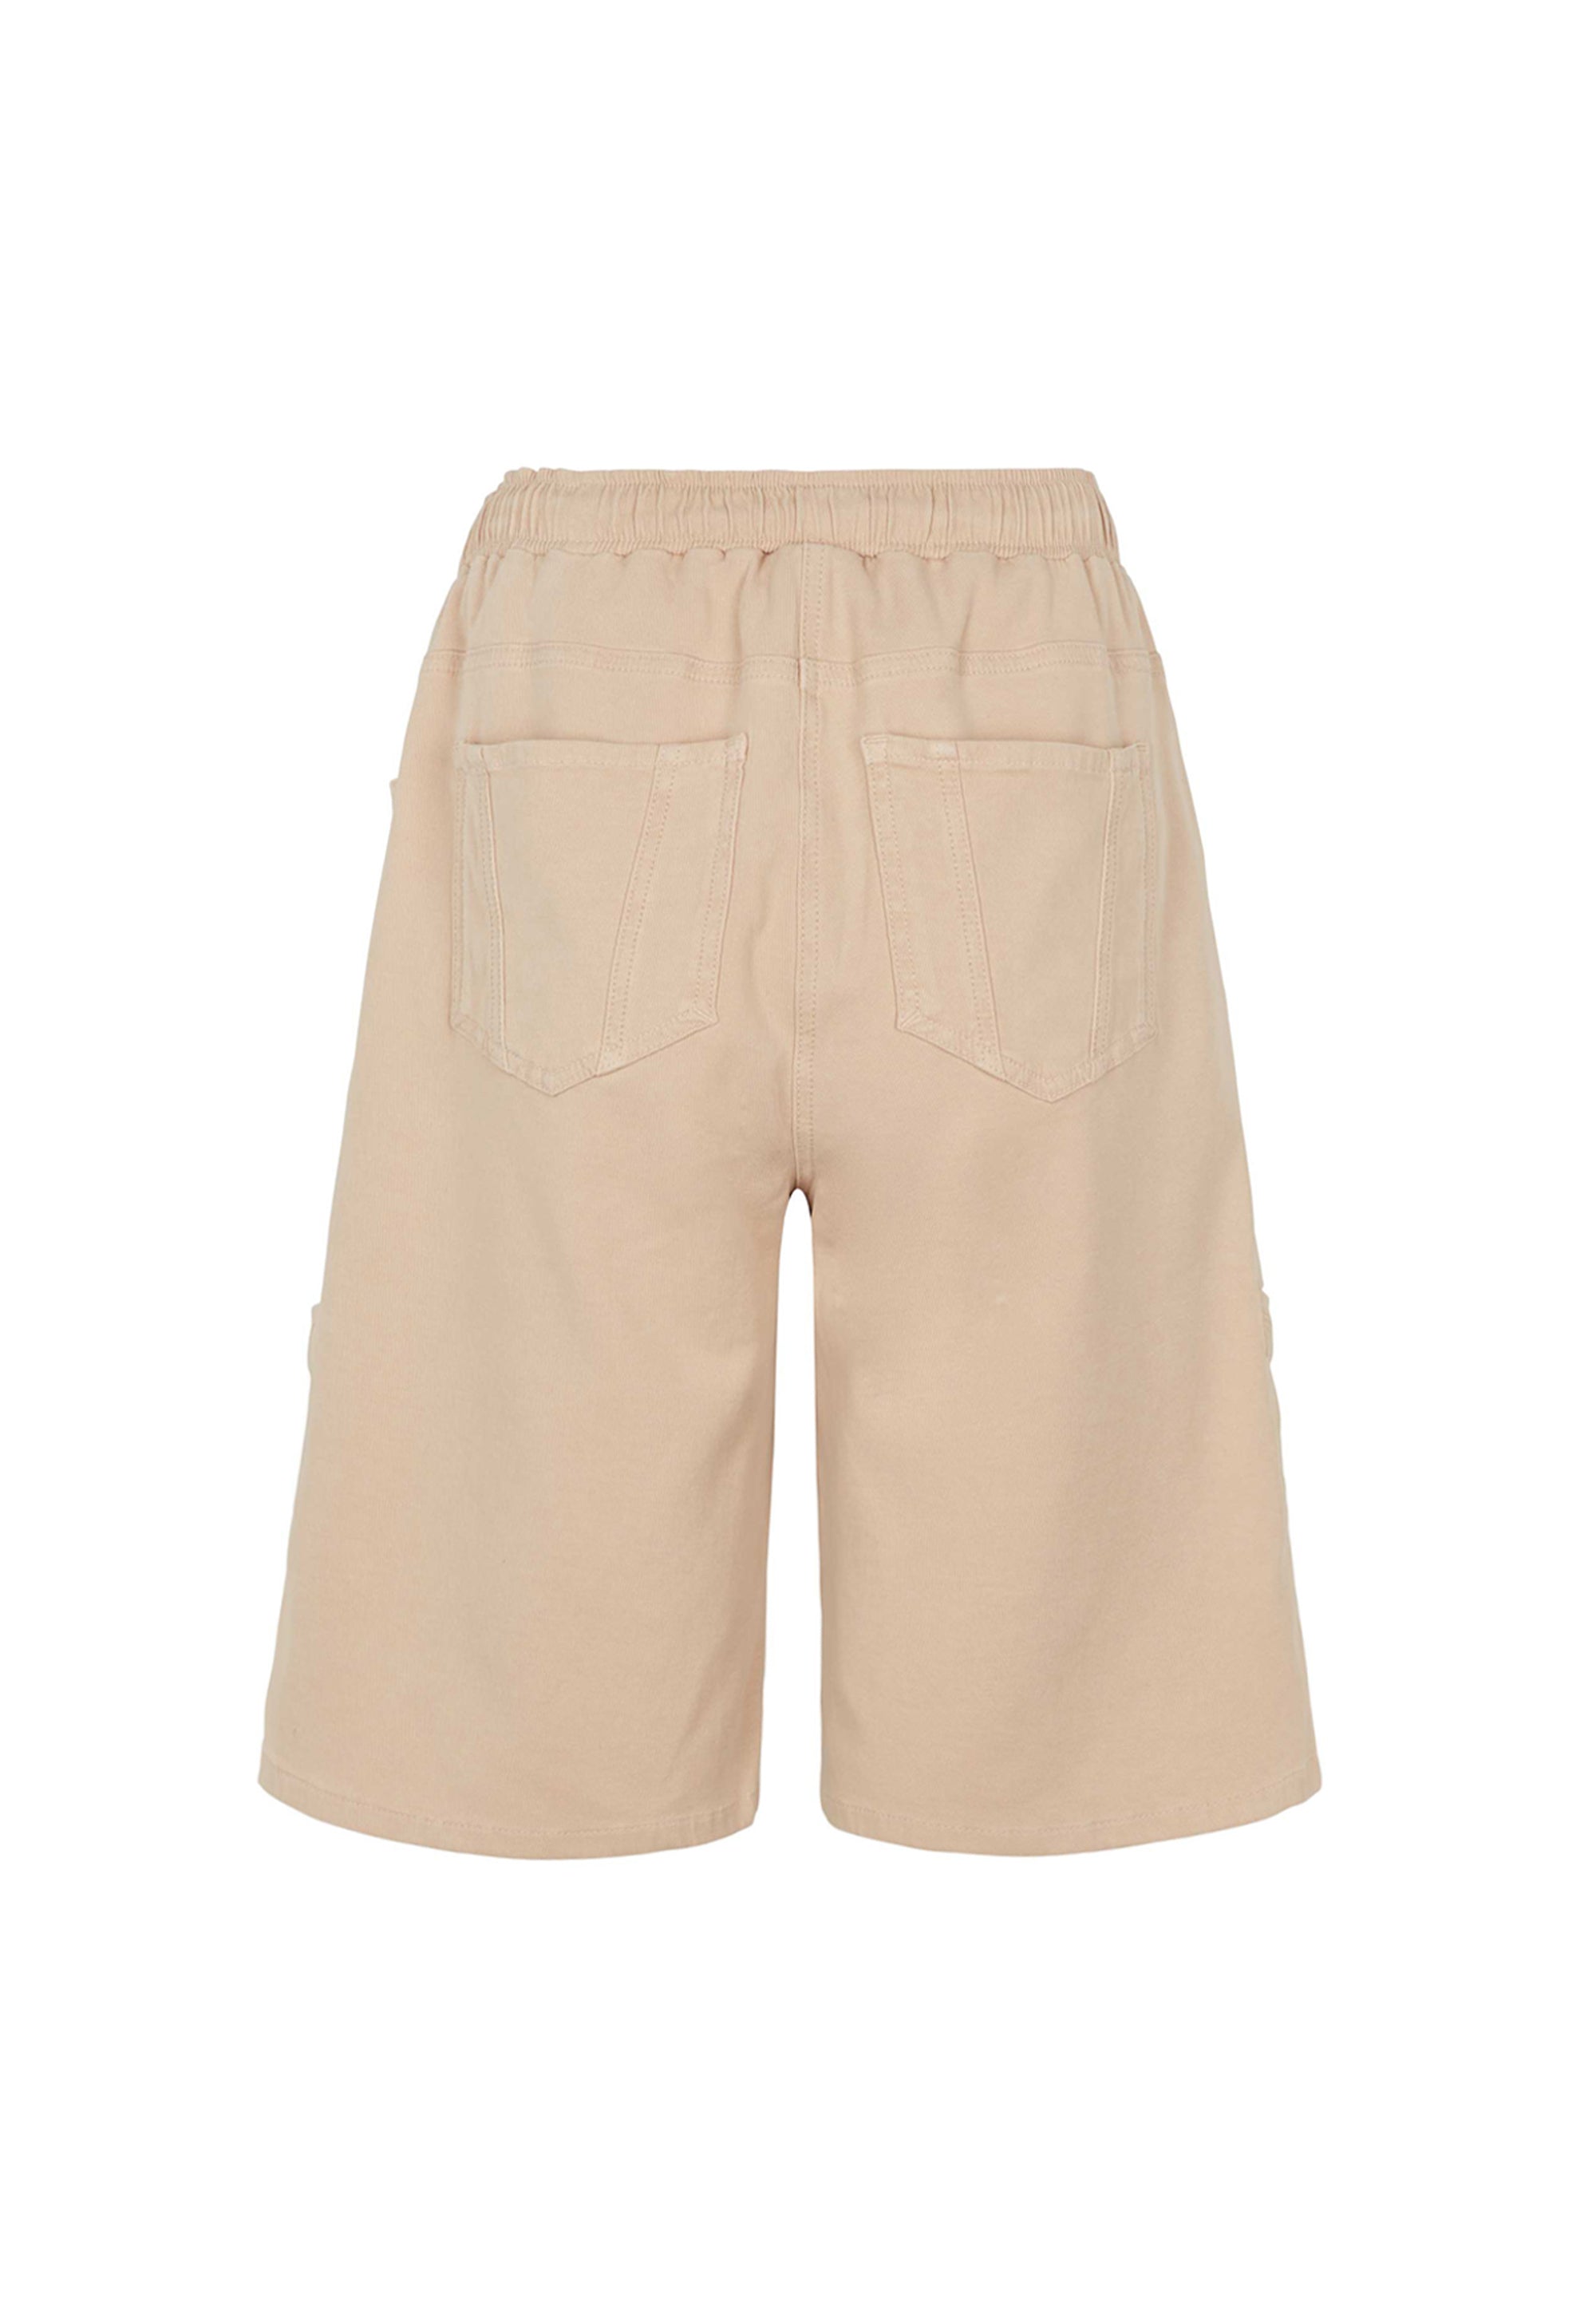 LAURIE Ofelia Cargo Relaxed Shorts Trousers RELAXED 26000 Safari